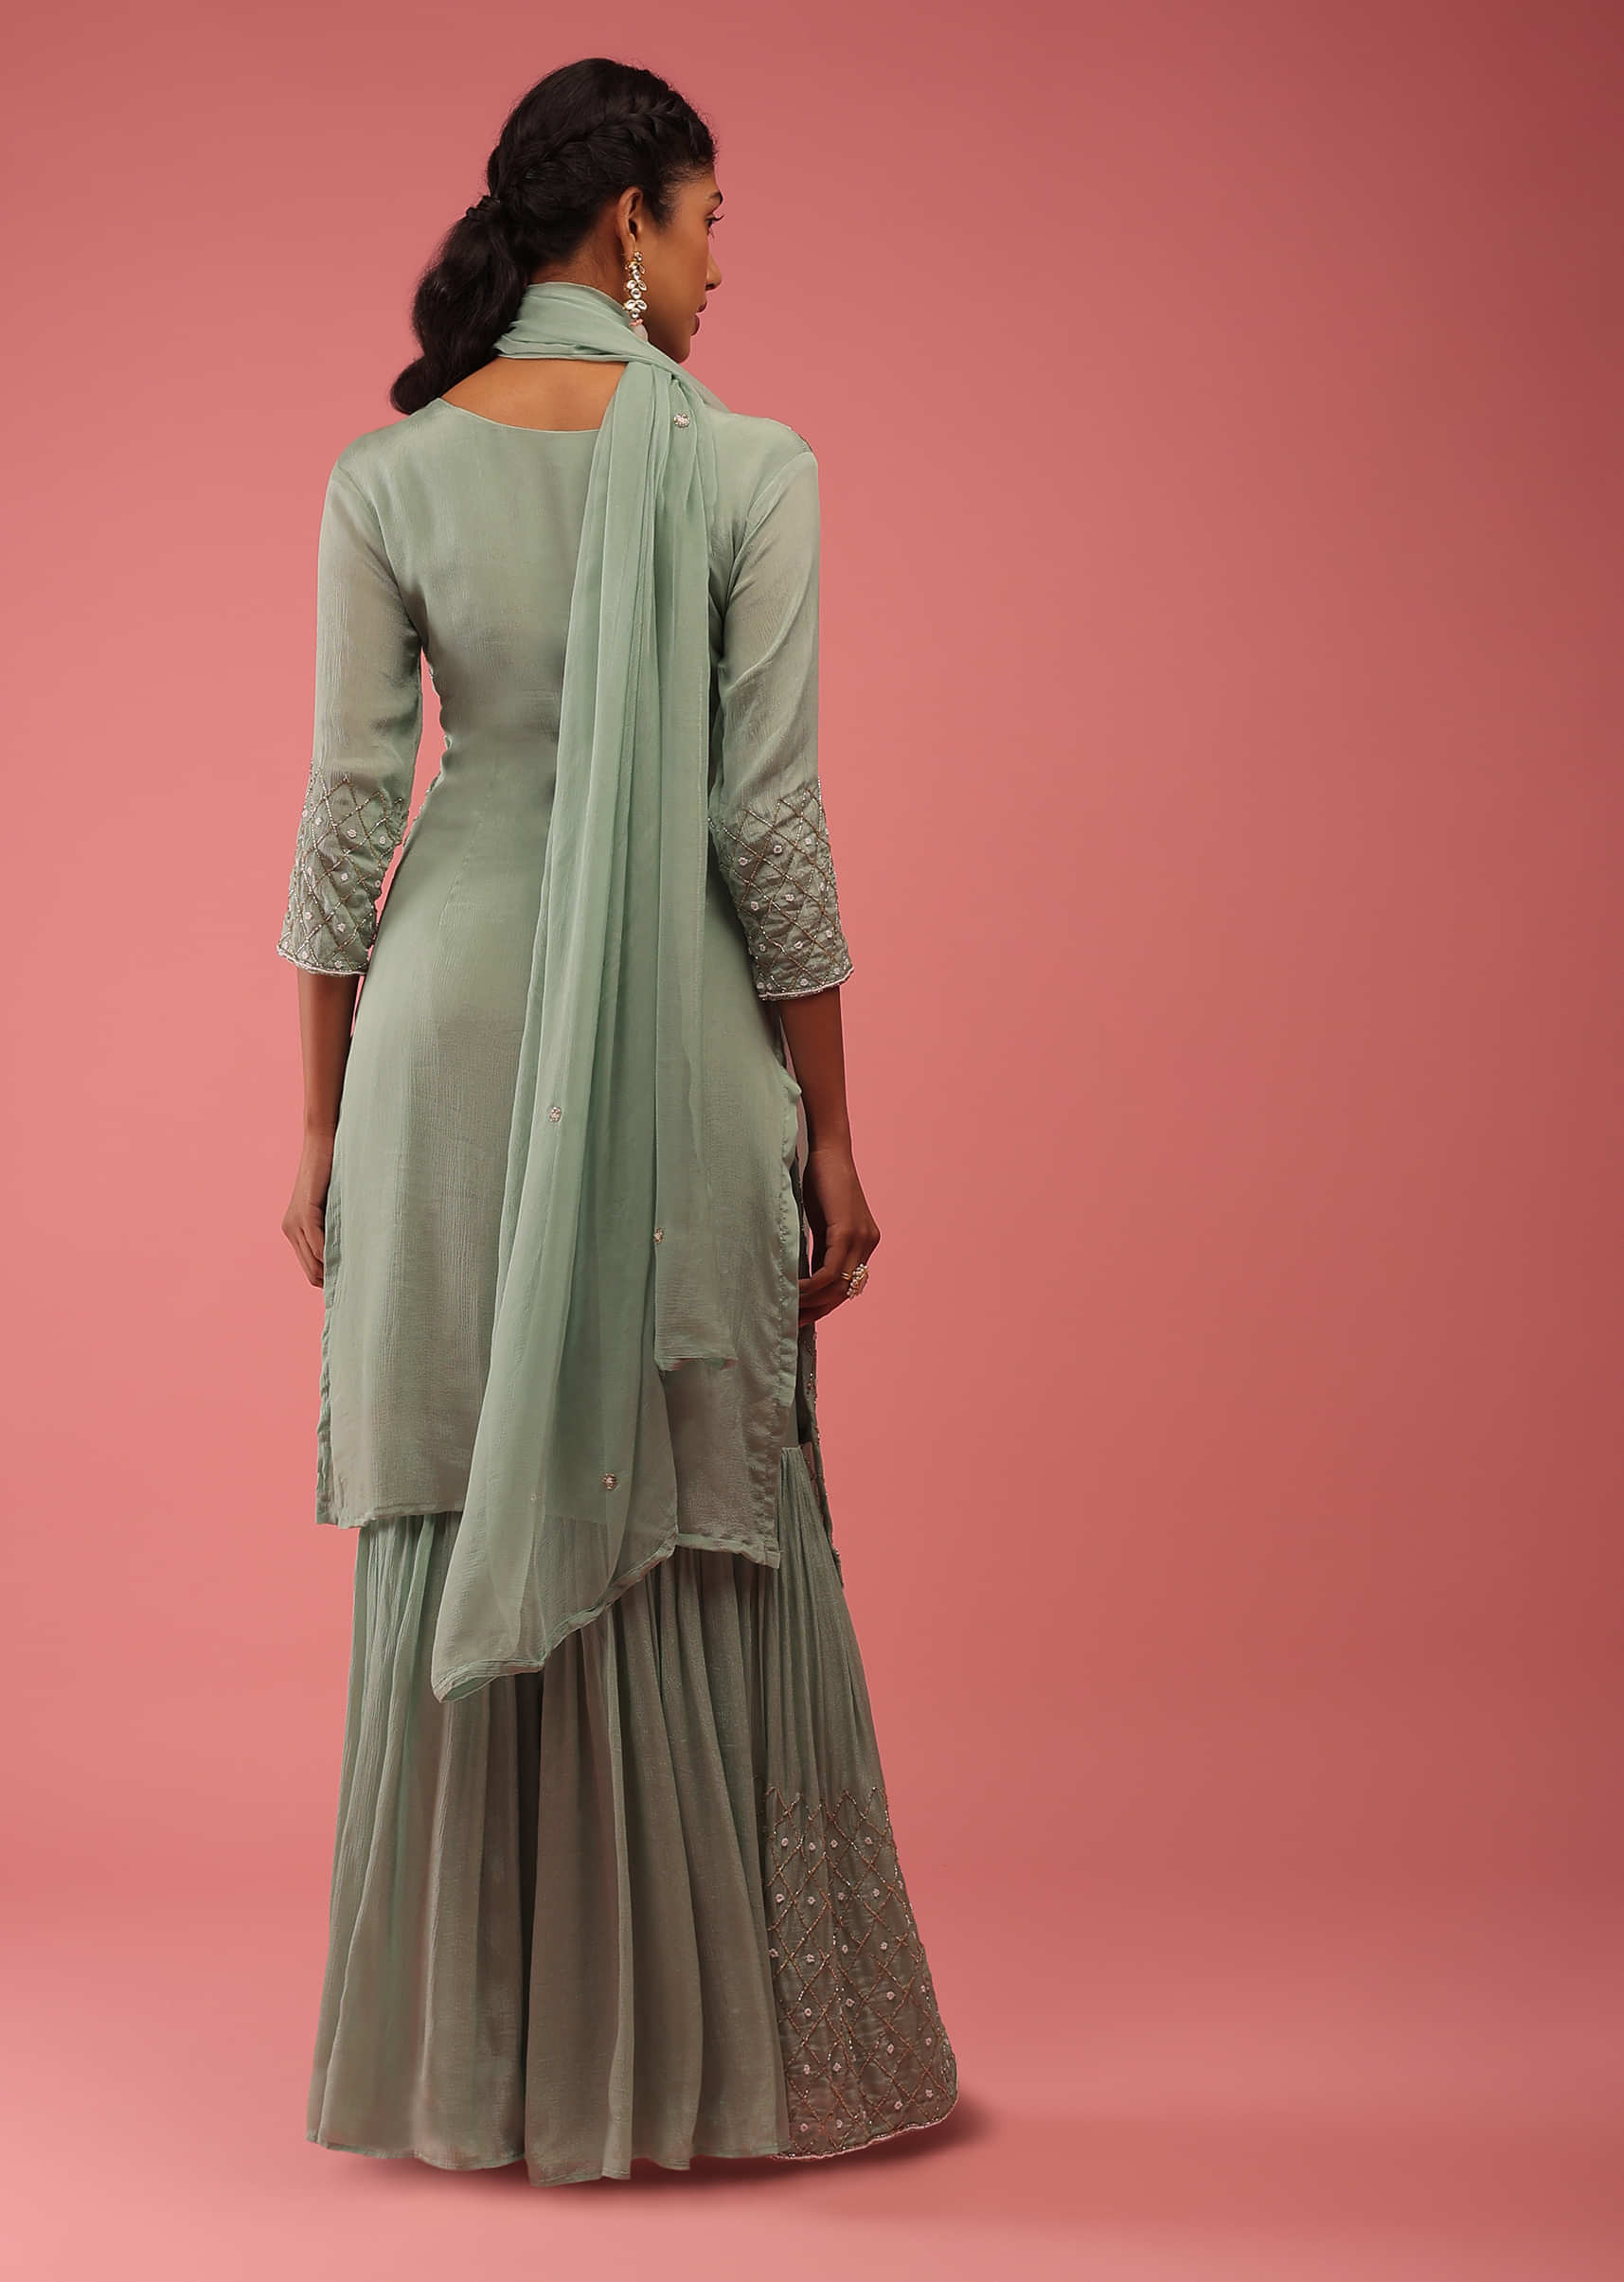 Quiet Green Sharara Suit In Cut Dana And Moti Embroidery, Crafted In Satin With Pink French Knots Embroidery On The Border